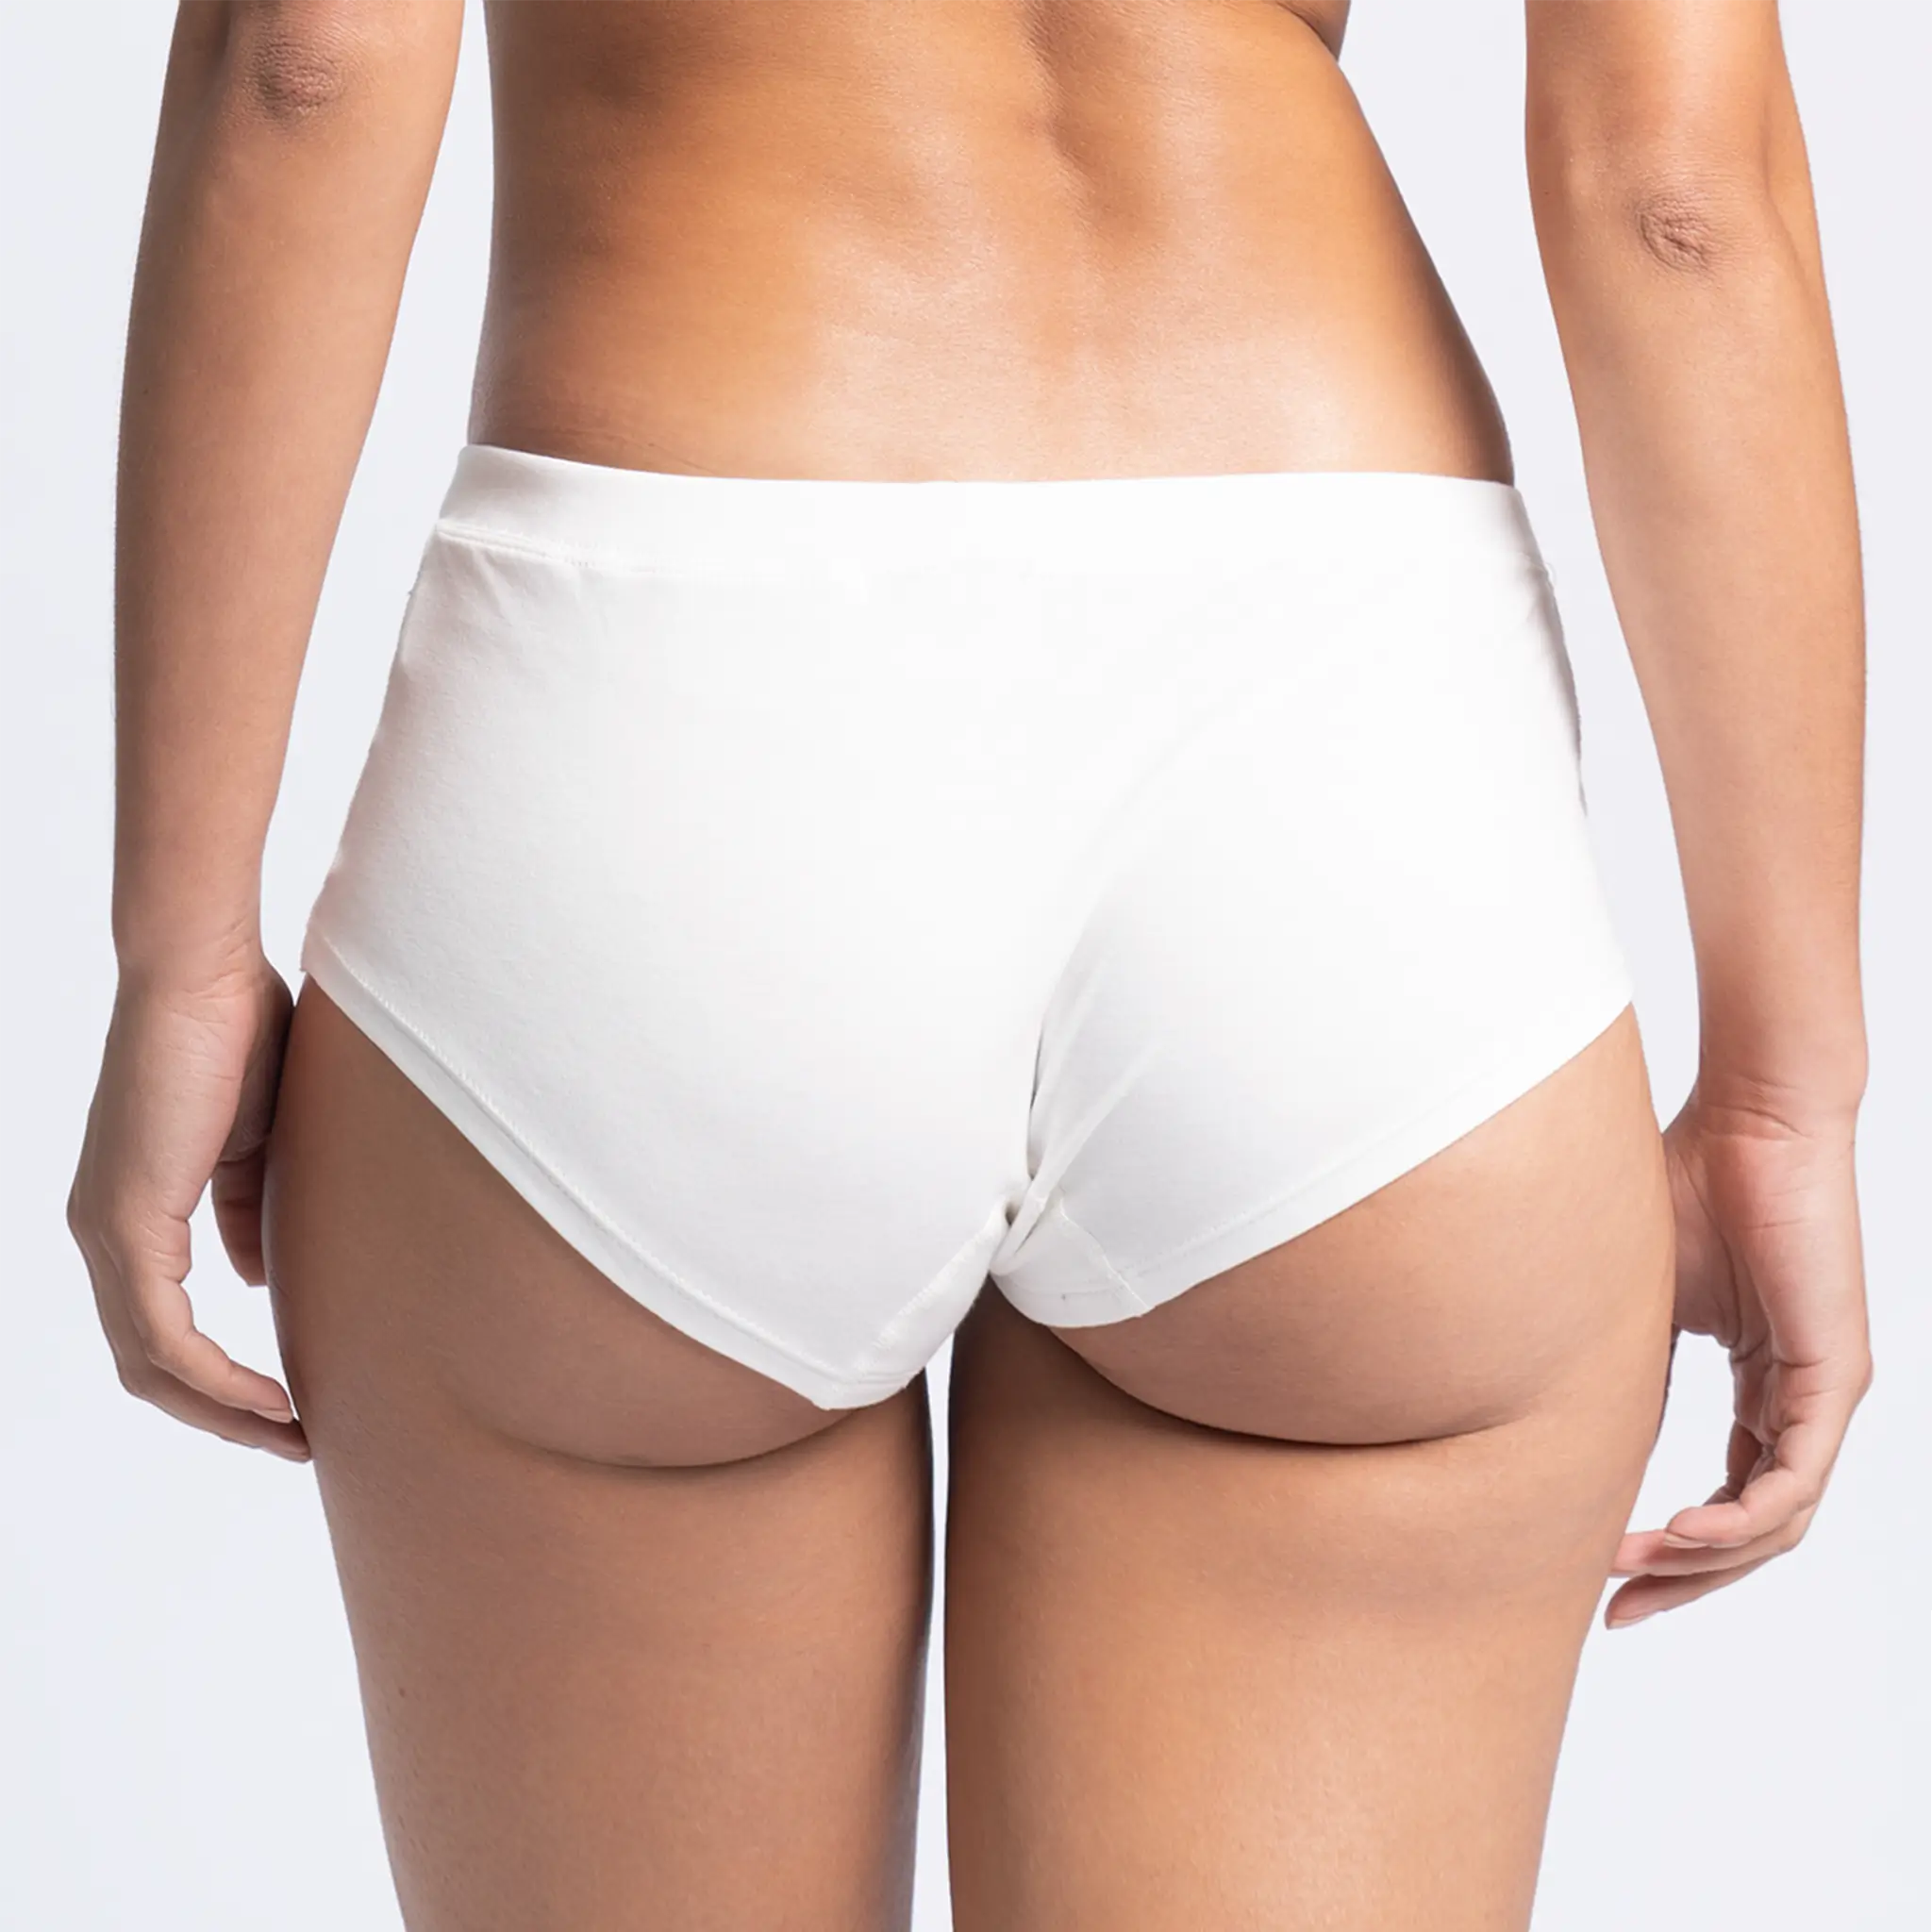 womens hypoallergenic panties color white